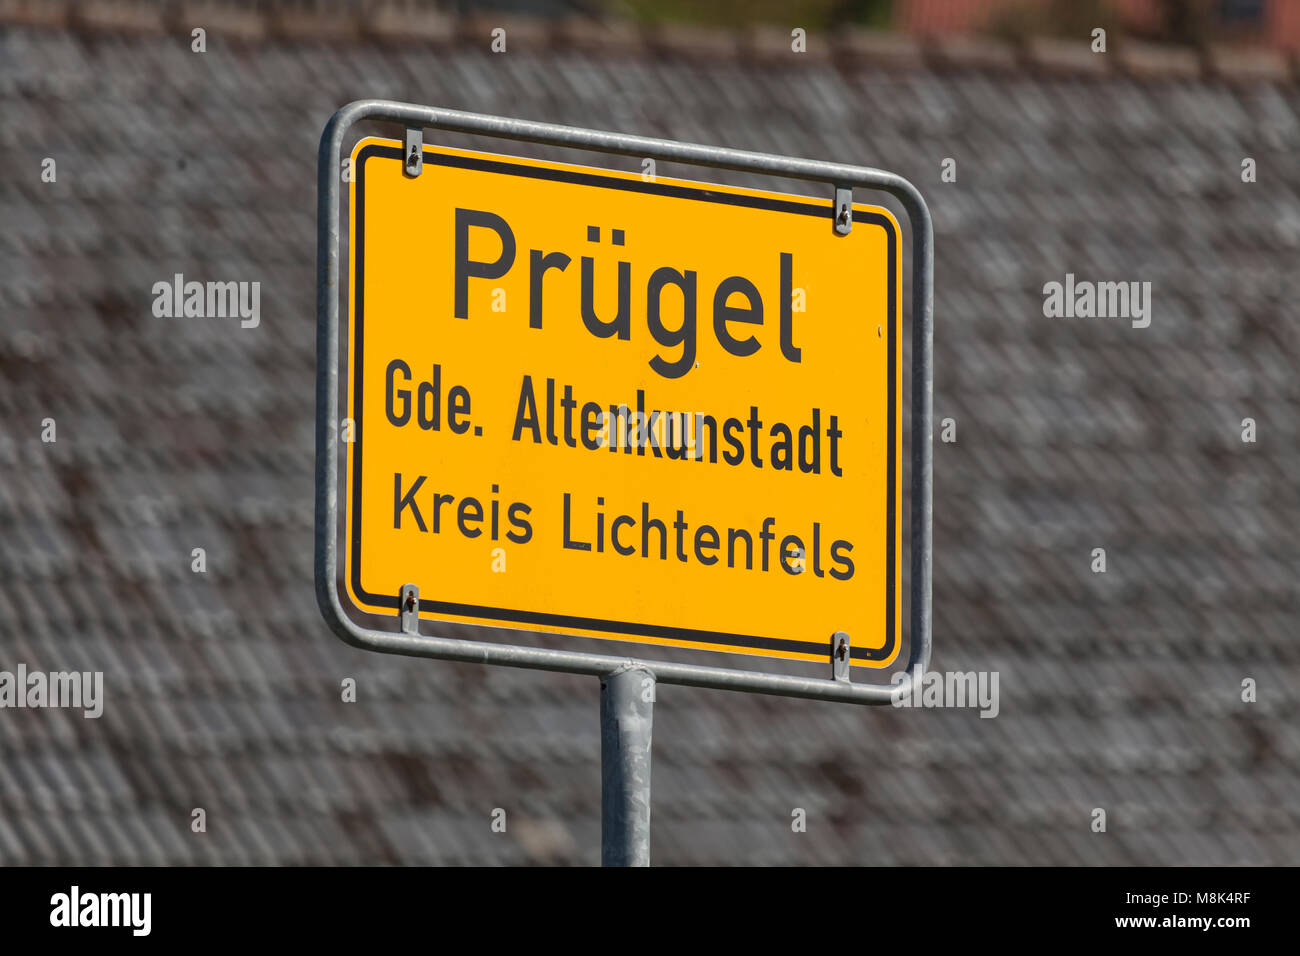 Town Sign of 'Prügel' in Franconia, Bavaria, Germany. Prügel being the German word for 'beating' or 'hitting' (s. o.) Stock Photo